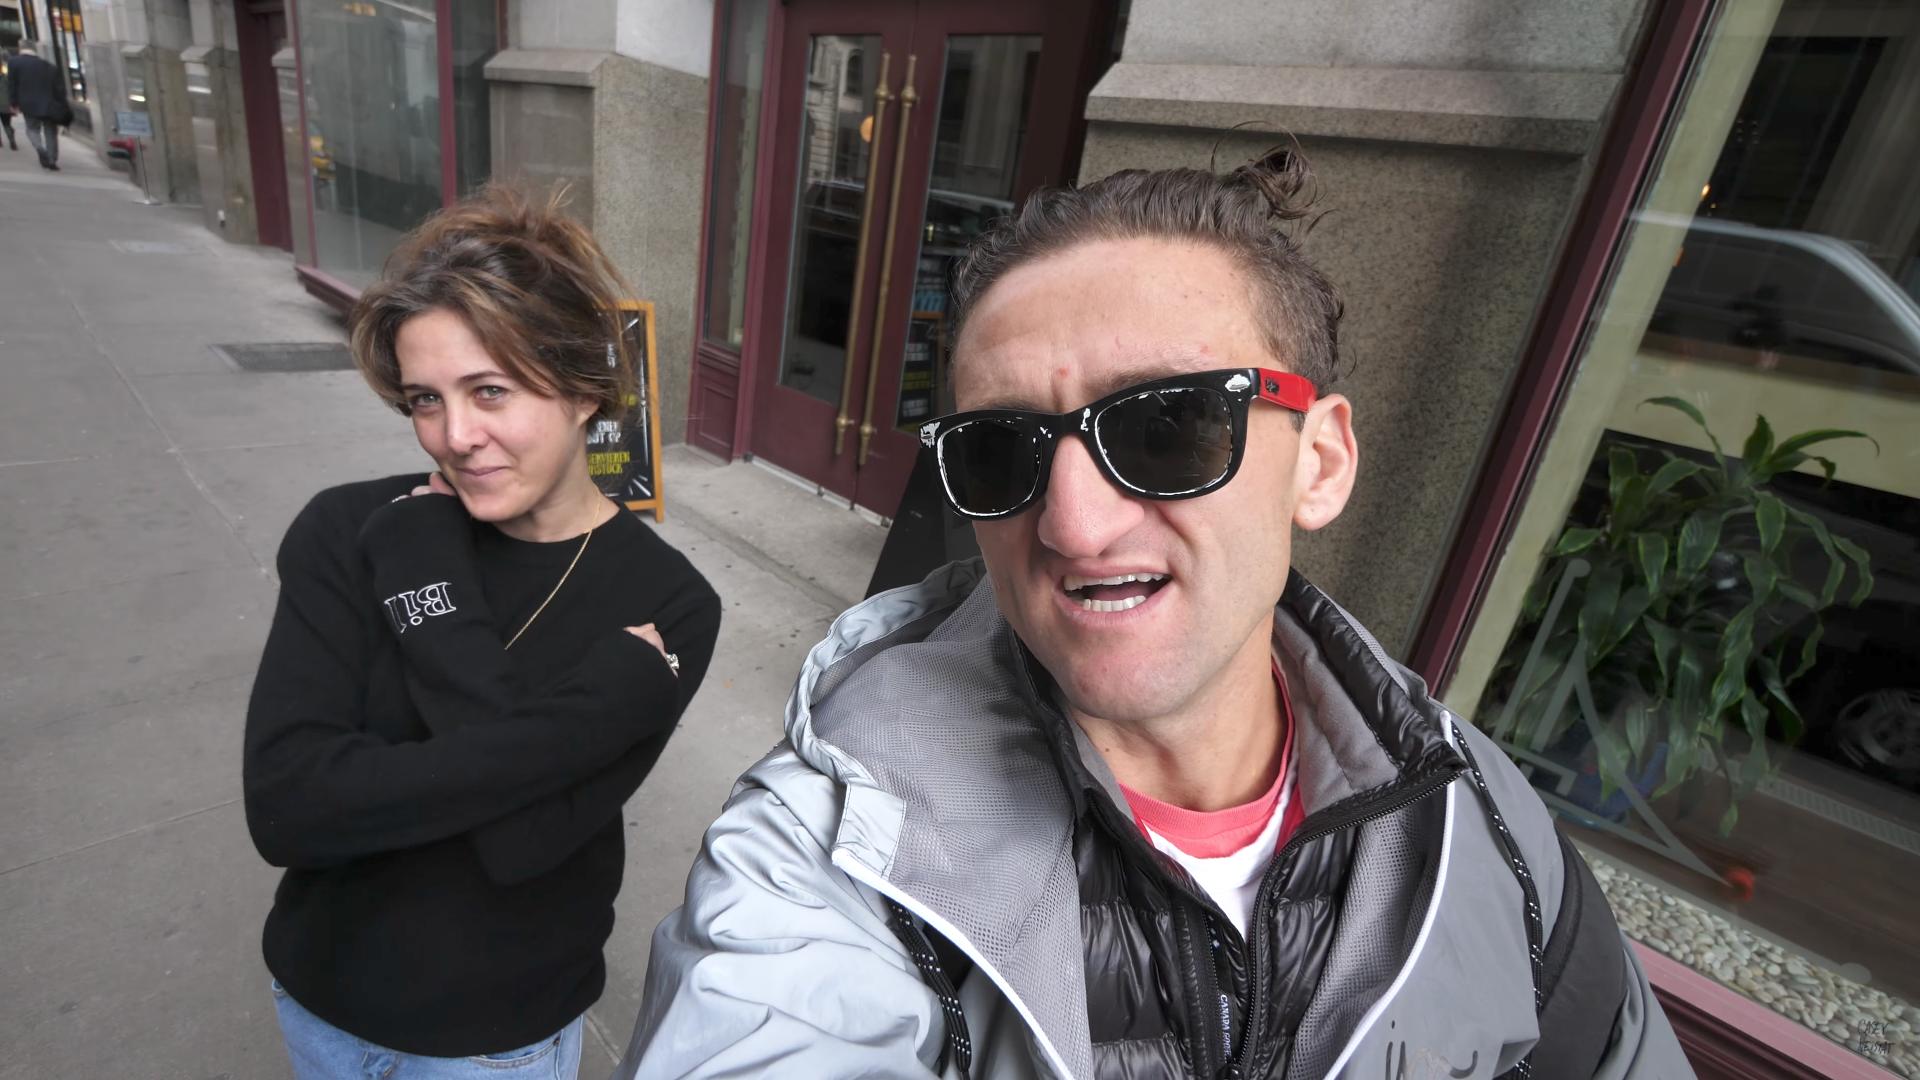 Casey and Candice. Photo by: Casey Neistat / YouTube